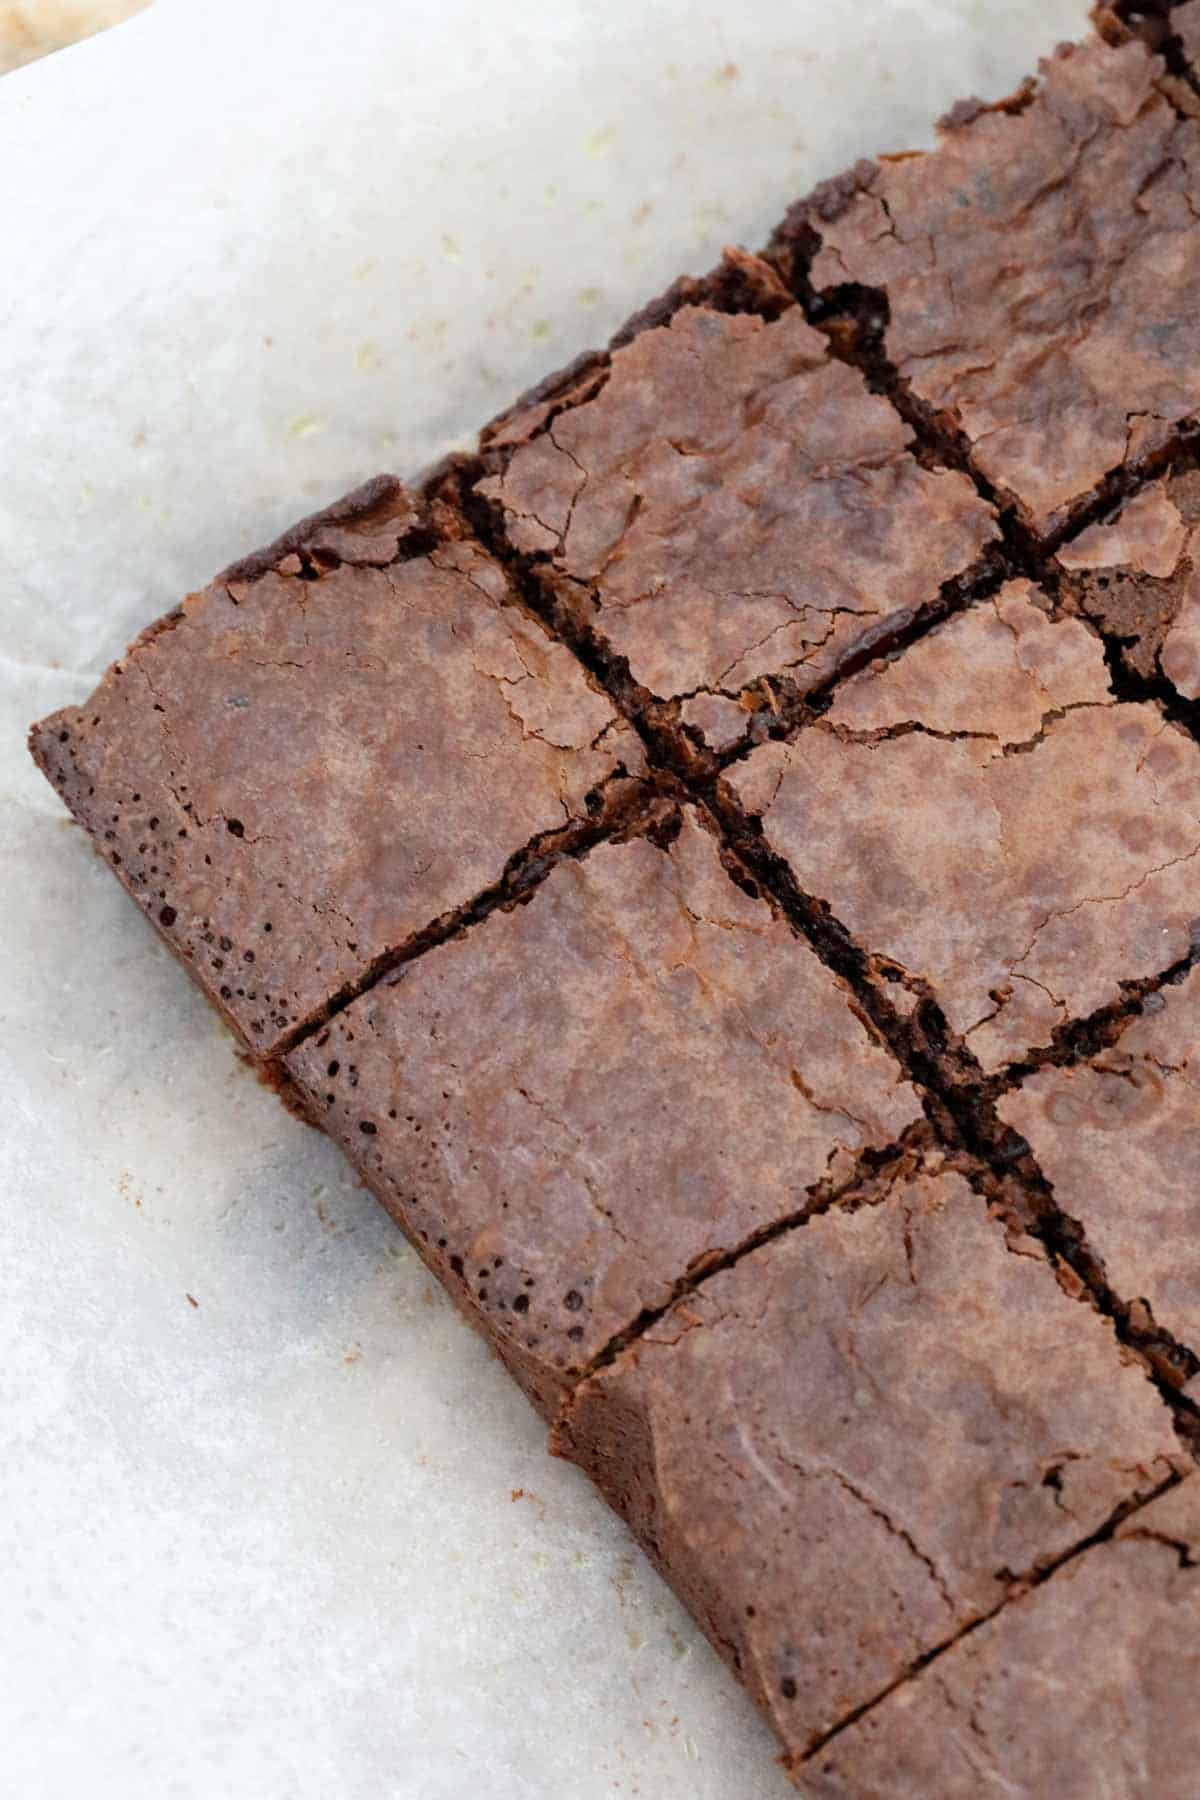 The baked espresso brownies, with flaky tops, cut into squares.